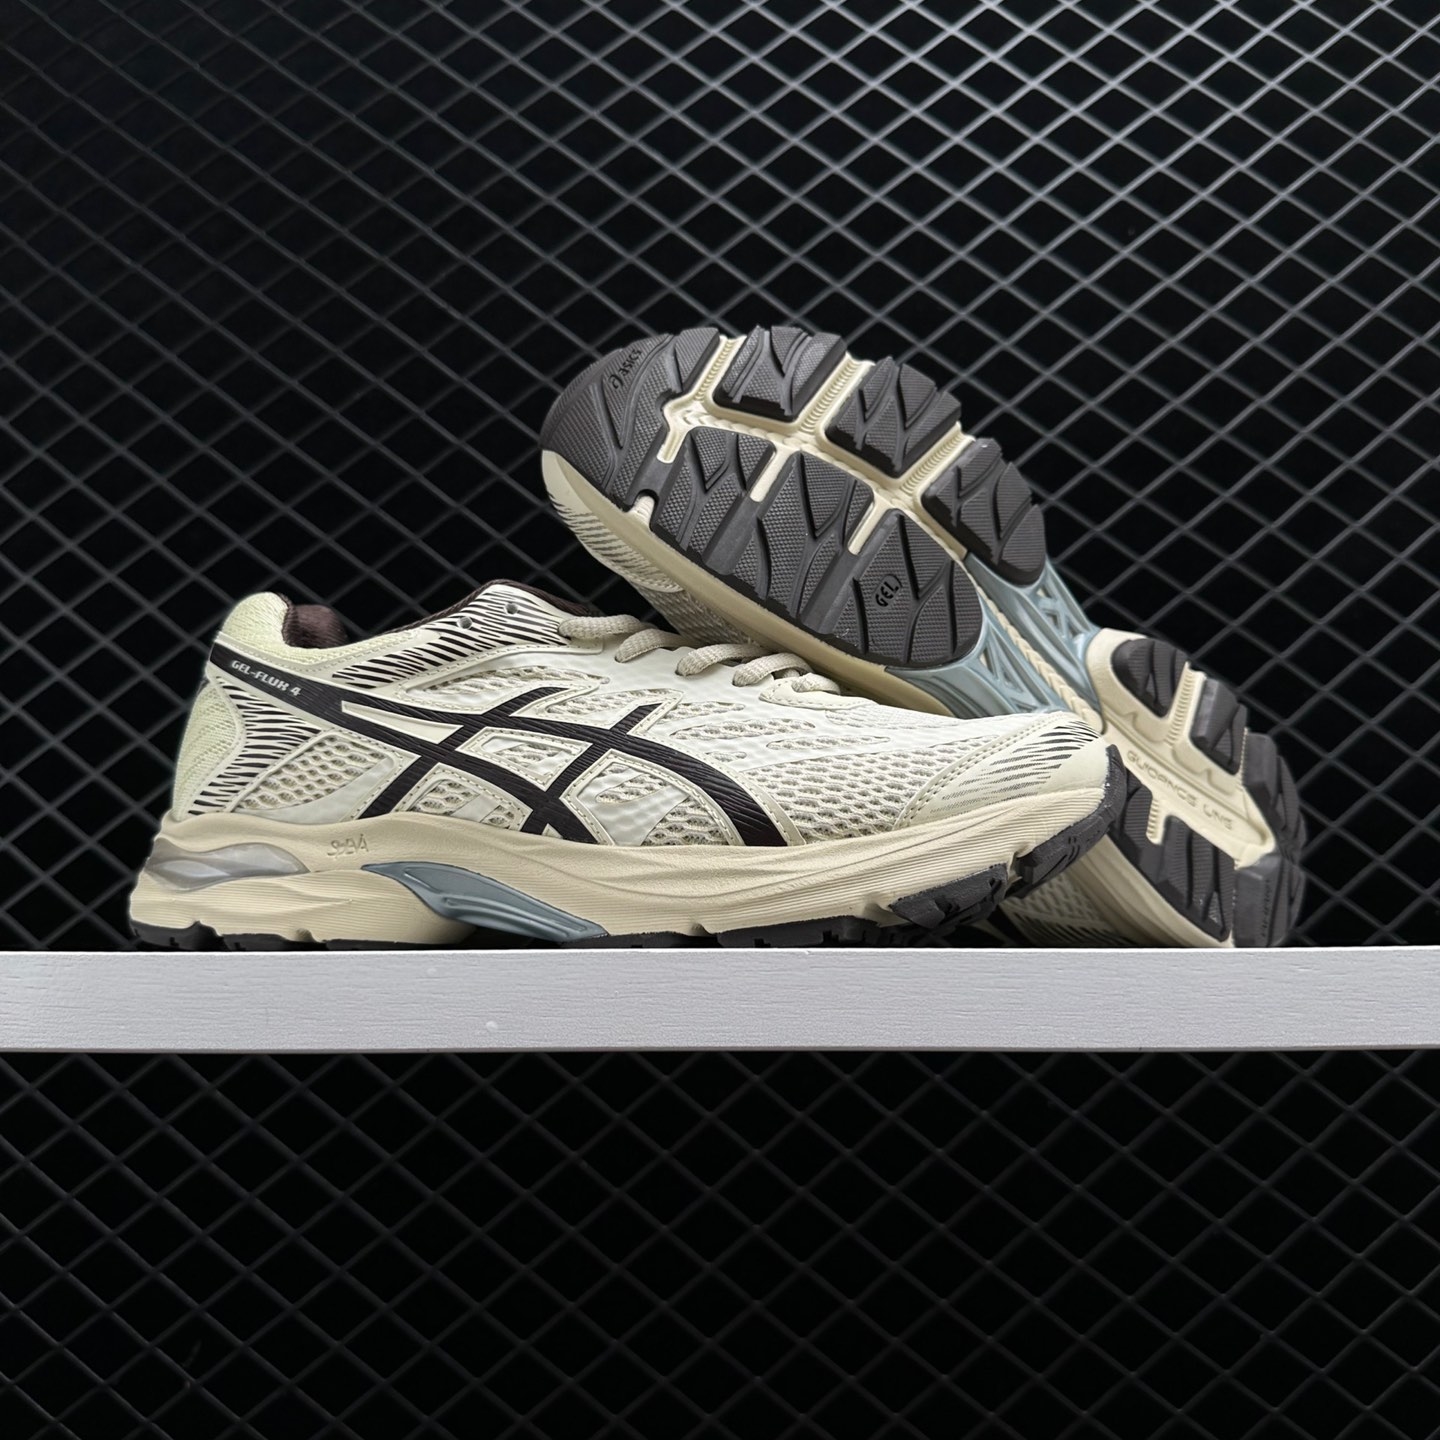 Male Asics Gel-Flux 'White Brown' 1011A614-200 - High-Performance Athletic Shoes